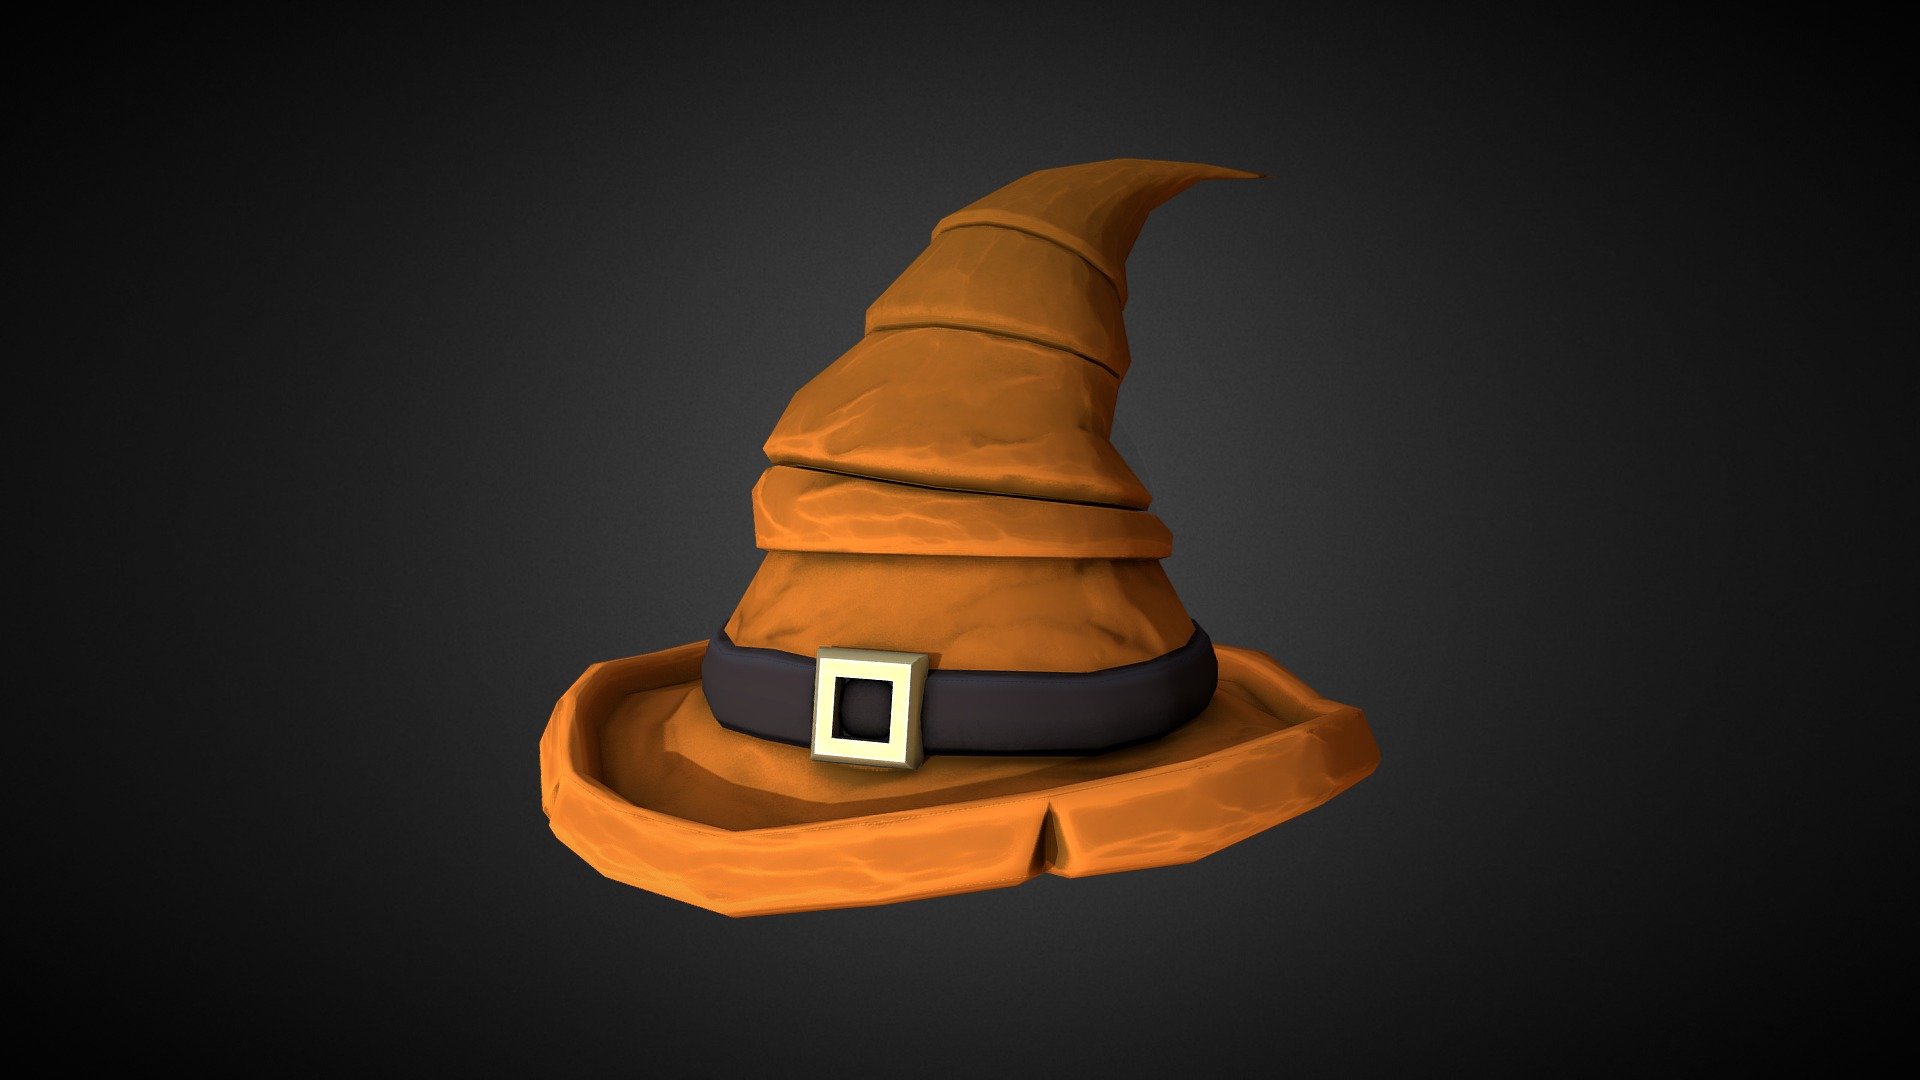 Hello everyone!
Today I upload a Witch Hat model that I made it thanks to the awesome concept by Myrto Flessa: https://www.artstation.com/artwork/A9ylWz

I really like the concept so last night I tried to recreate in 3D Stylized with PBR Textures.

If you like my work, you have to go to the Myrto concept first before you like mine! All feedback it's welcome like always, have a nice day! - Witch Hat - 3D model by mnemoxjr 3d model